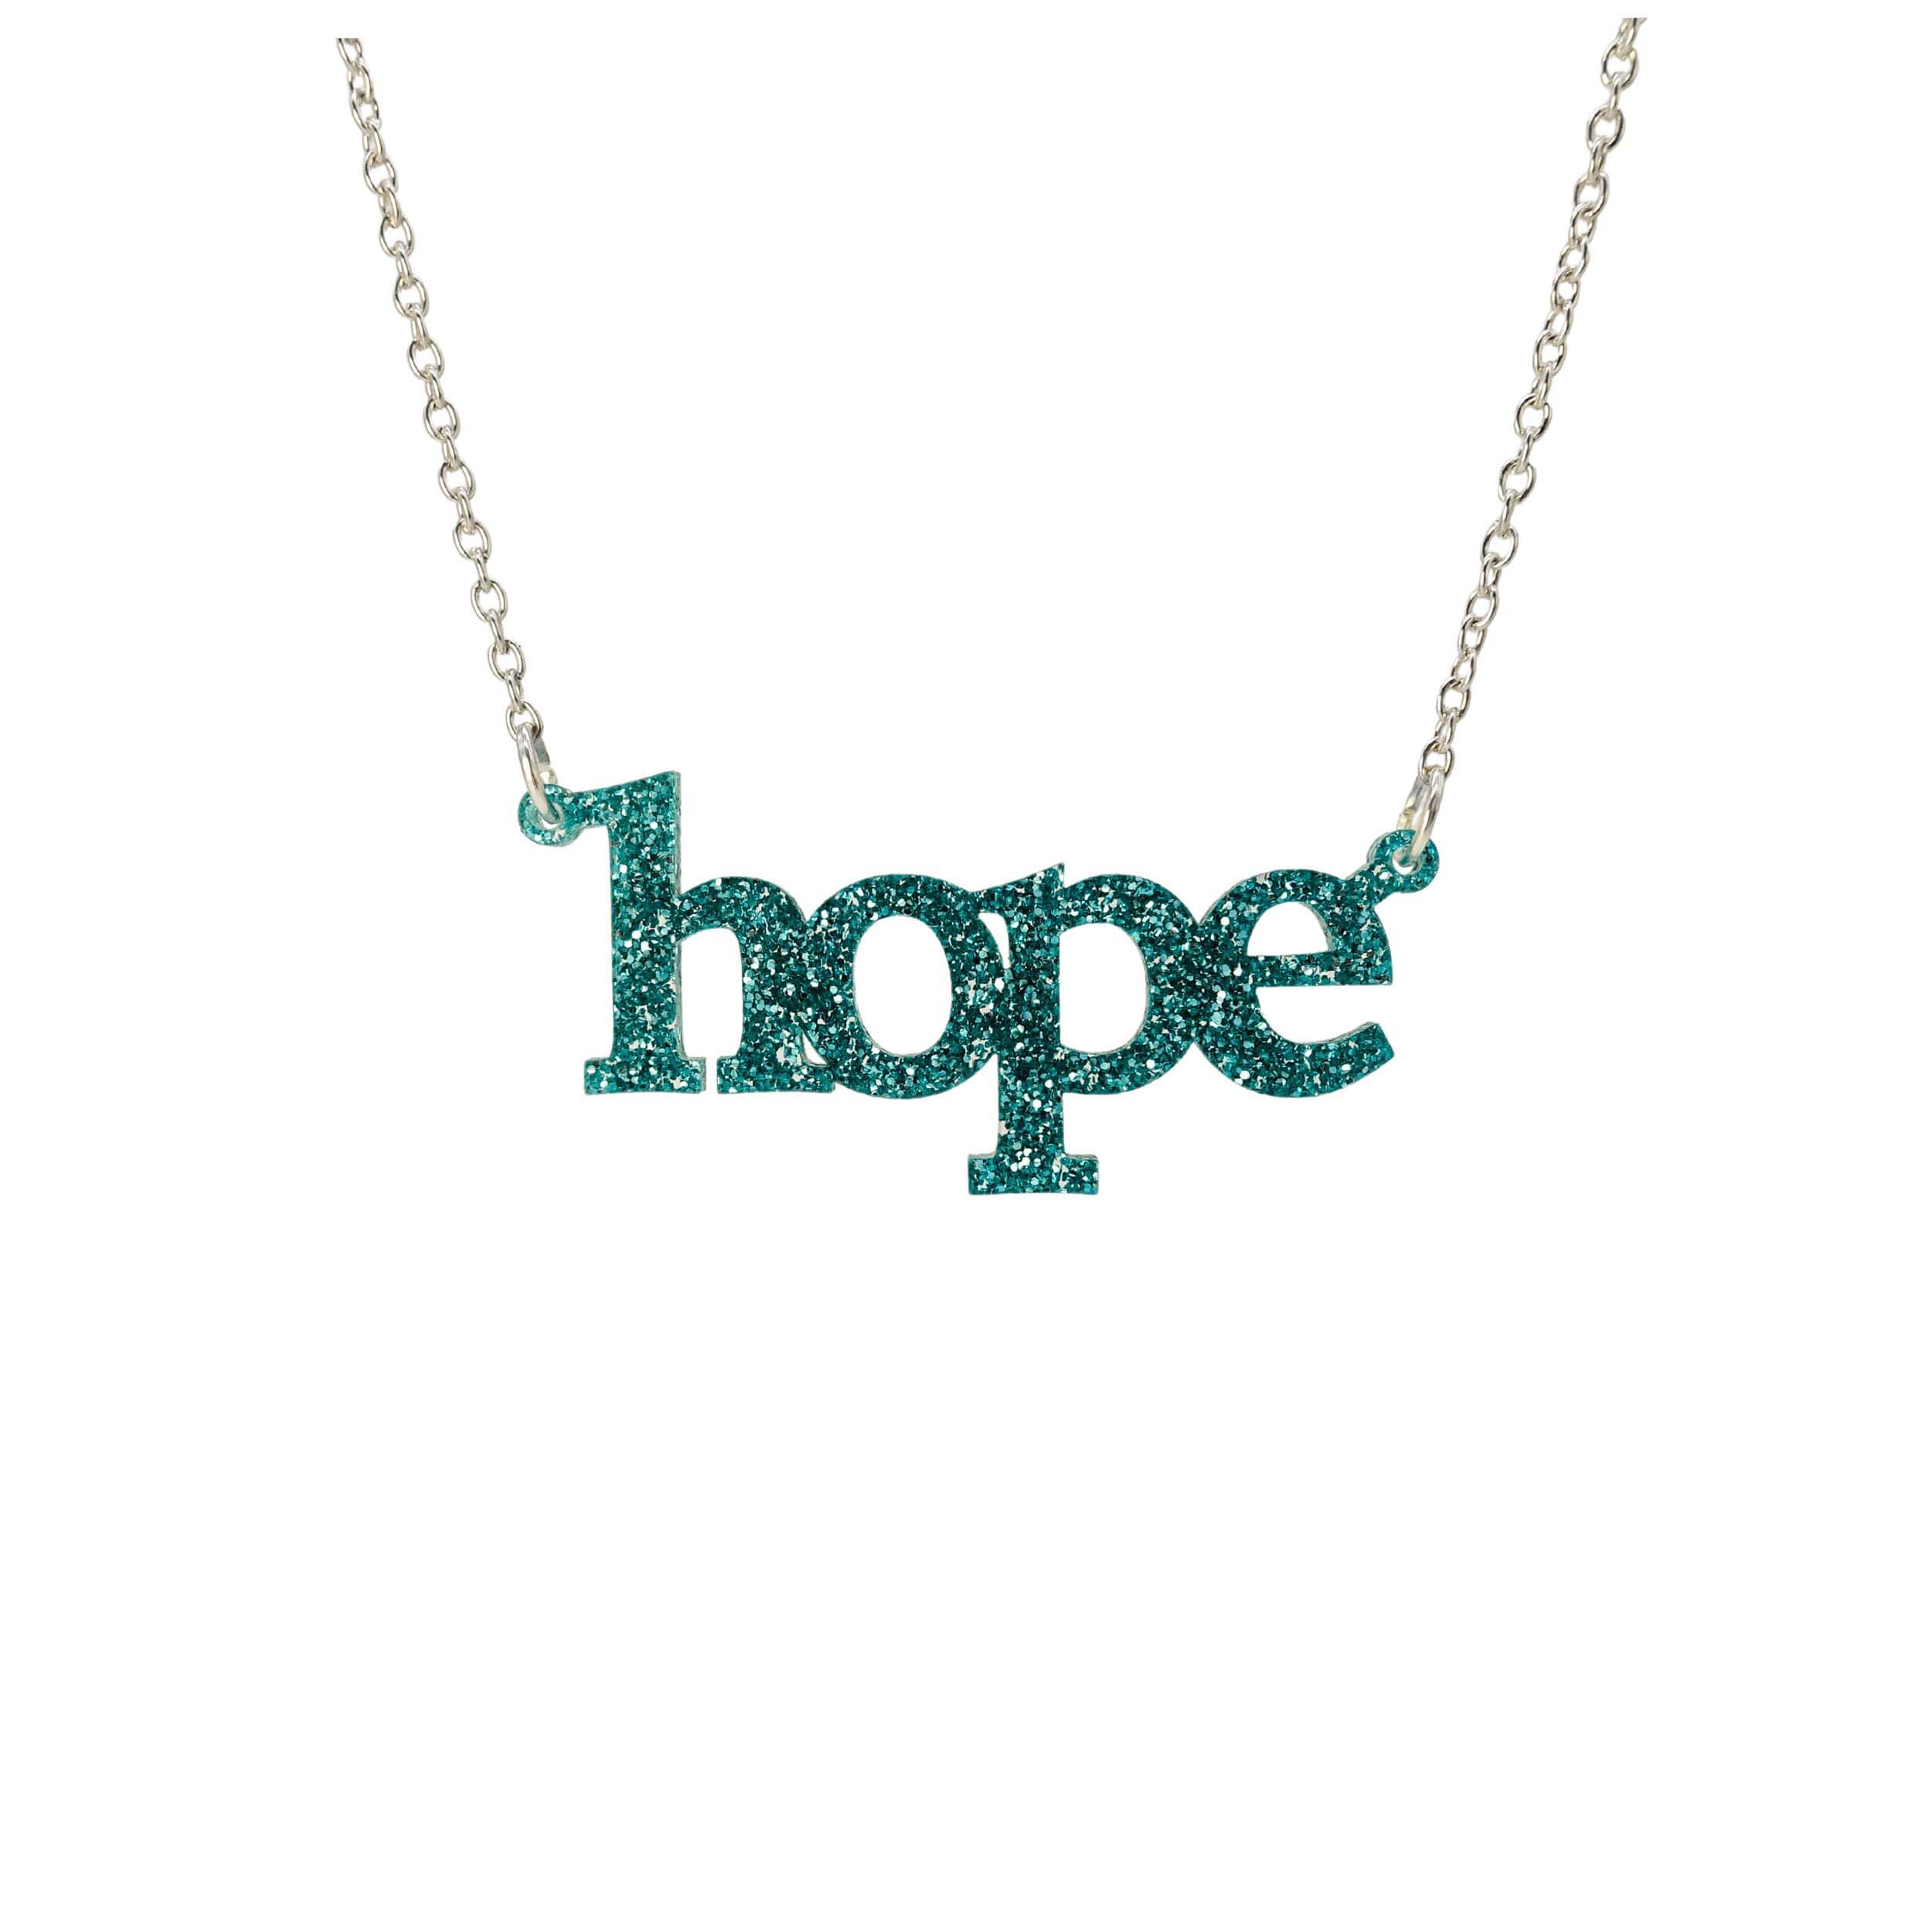 Hope necklace in teal glitter shown on a silver chain hanging on a white background. 